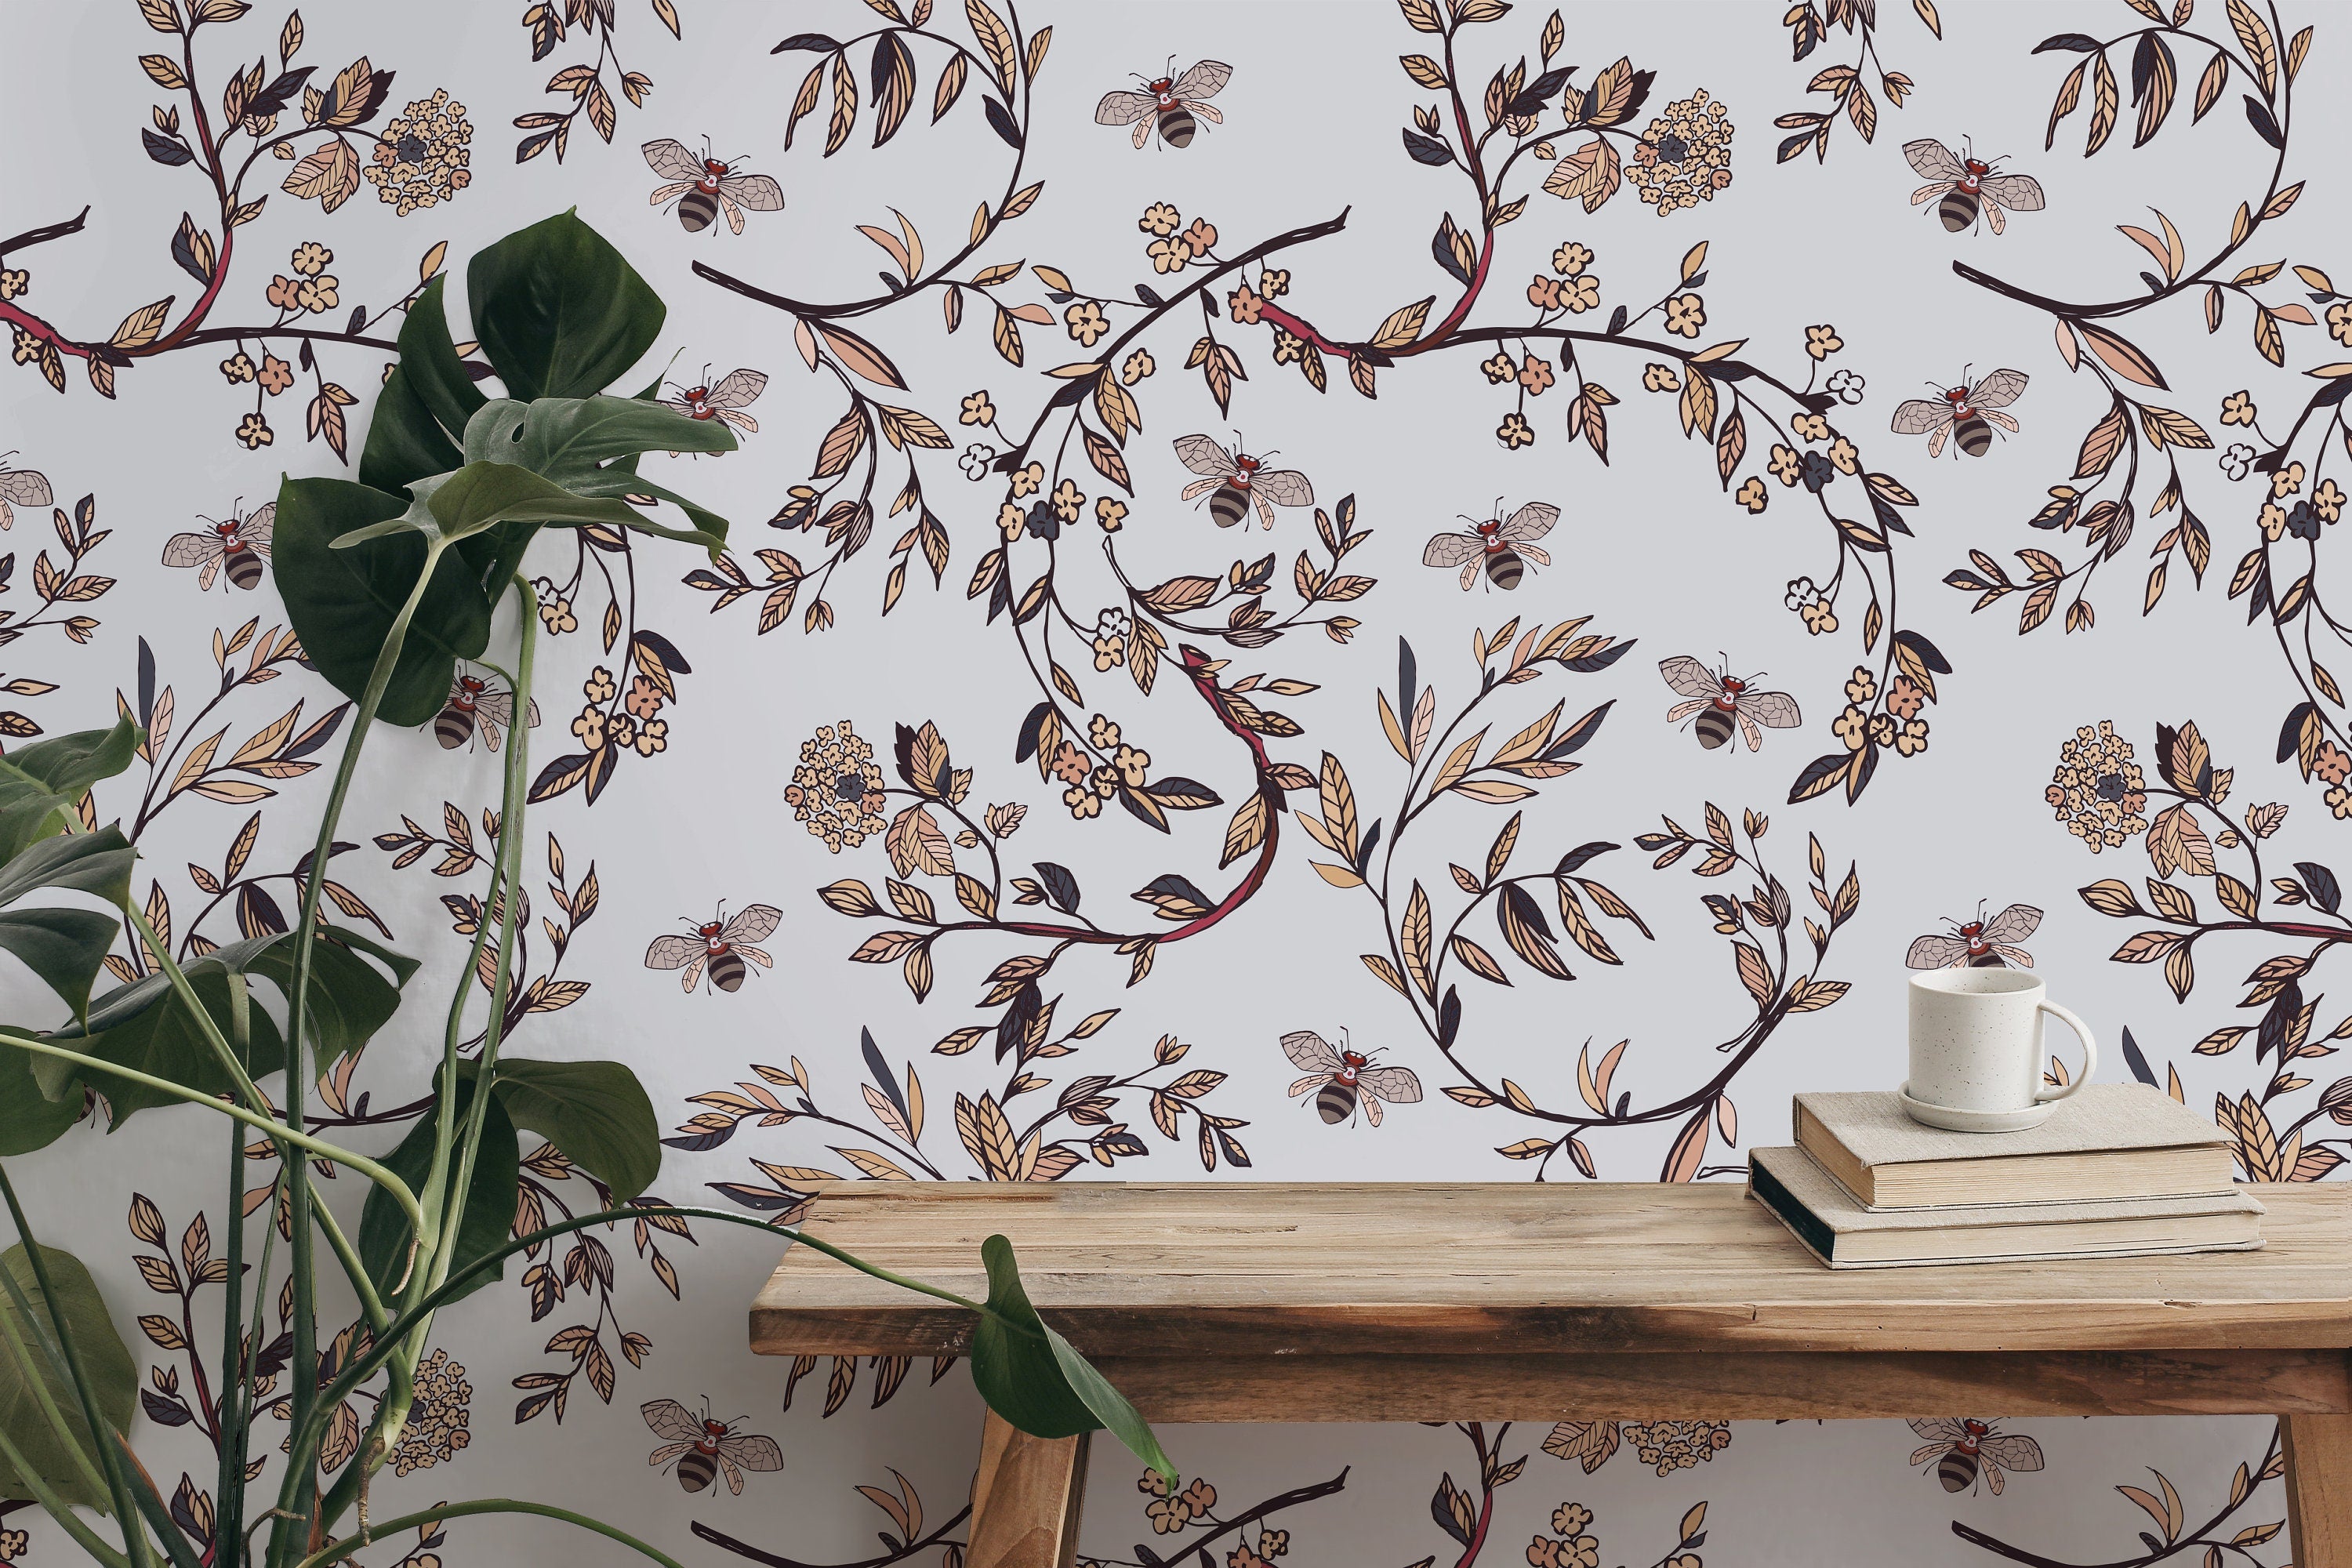 Vintage Gray Bee Branches Floral Wallpaper | Wallpaper Peel and Stick | Removable Wallpaper | Wall Paper Peel And Stick 2067 - JamesAndColors